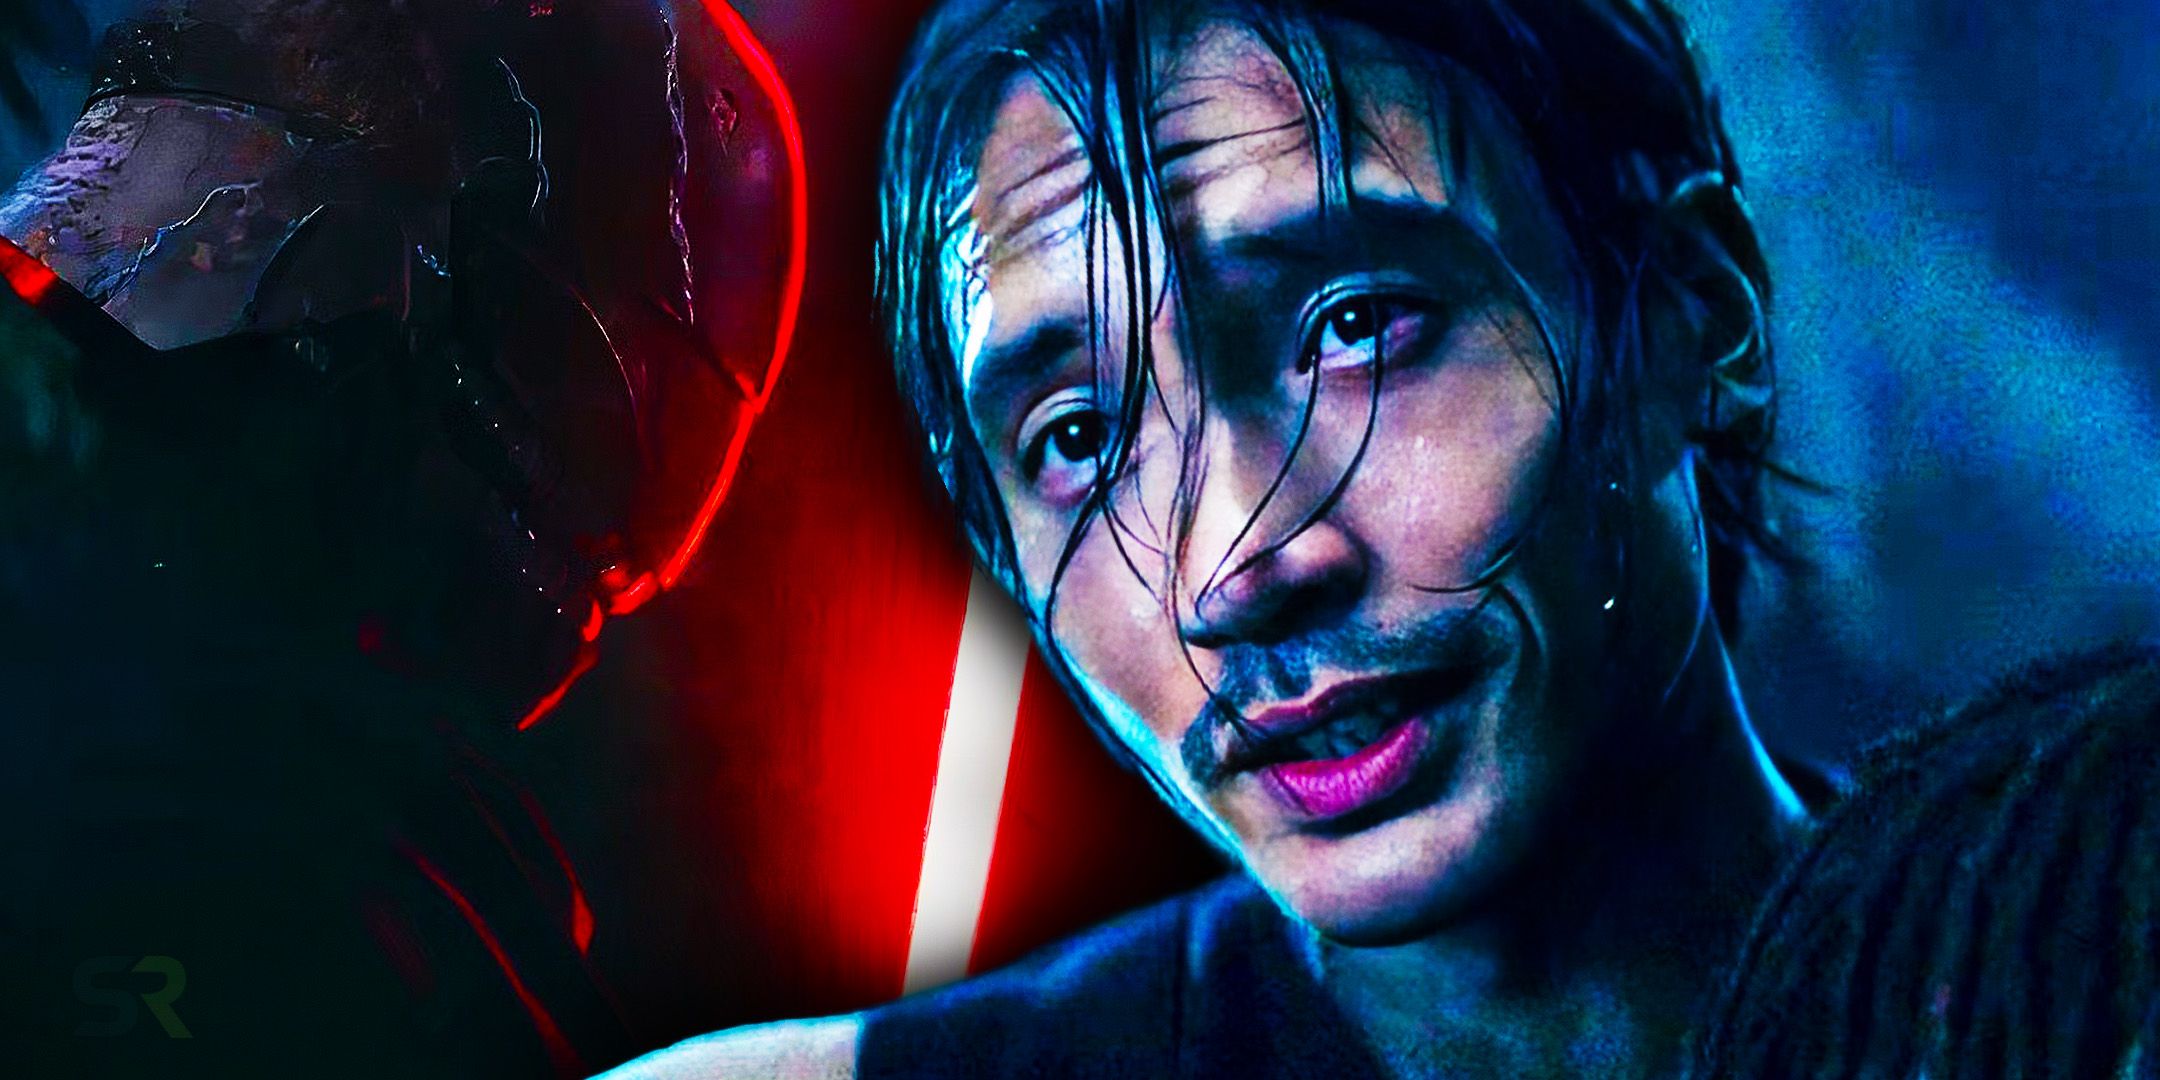 Manny Jacinto to the right as the Stranger in The Acolyte and the masked Sith to the left in a combined image